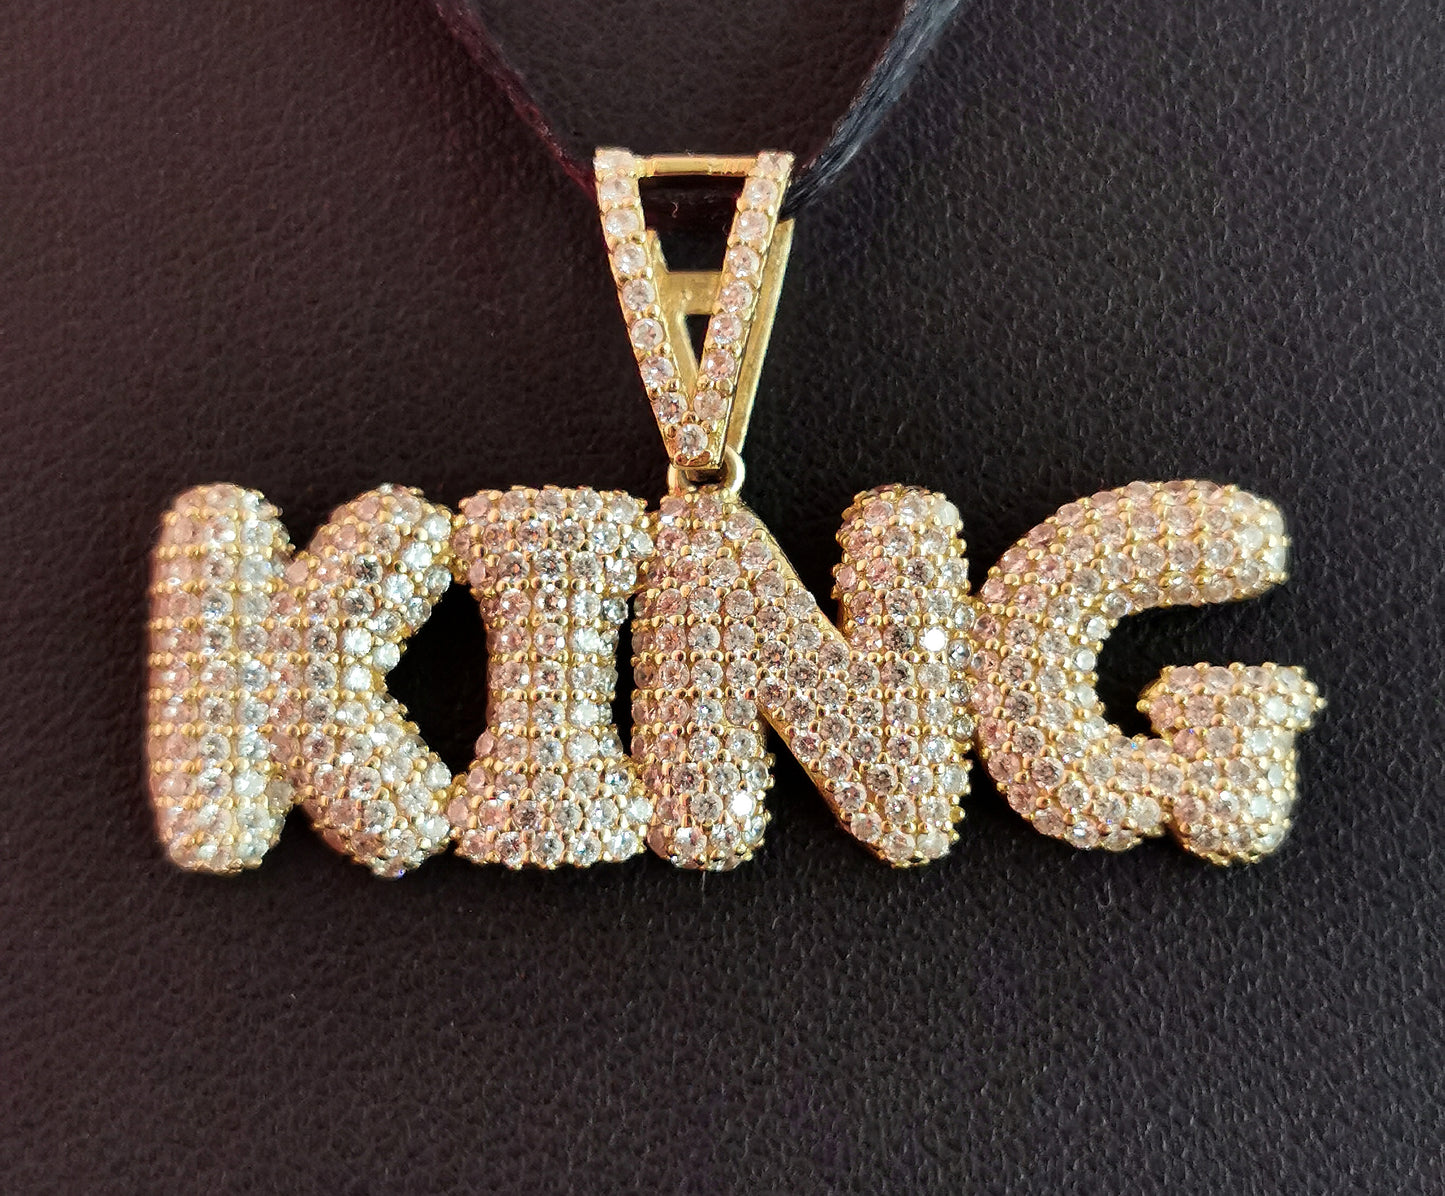 Bling King pendant, 14ct yellow gold, Cubic Zirconia, Iced out